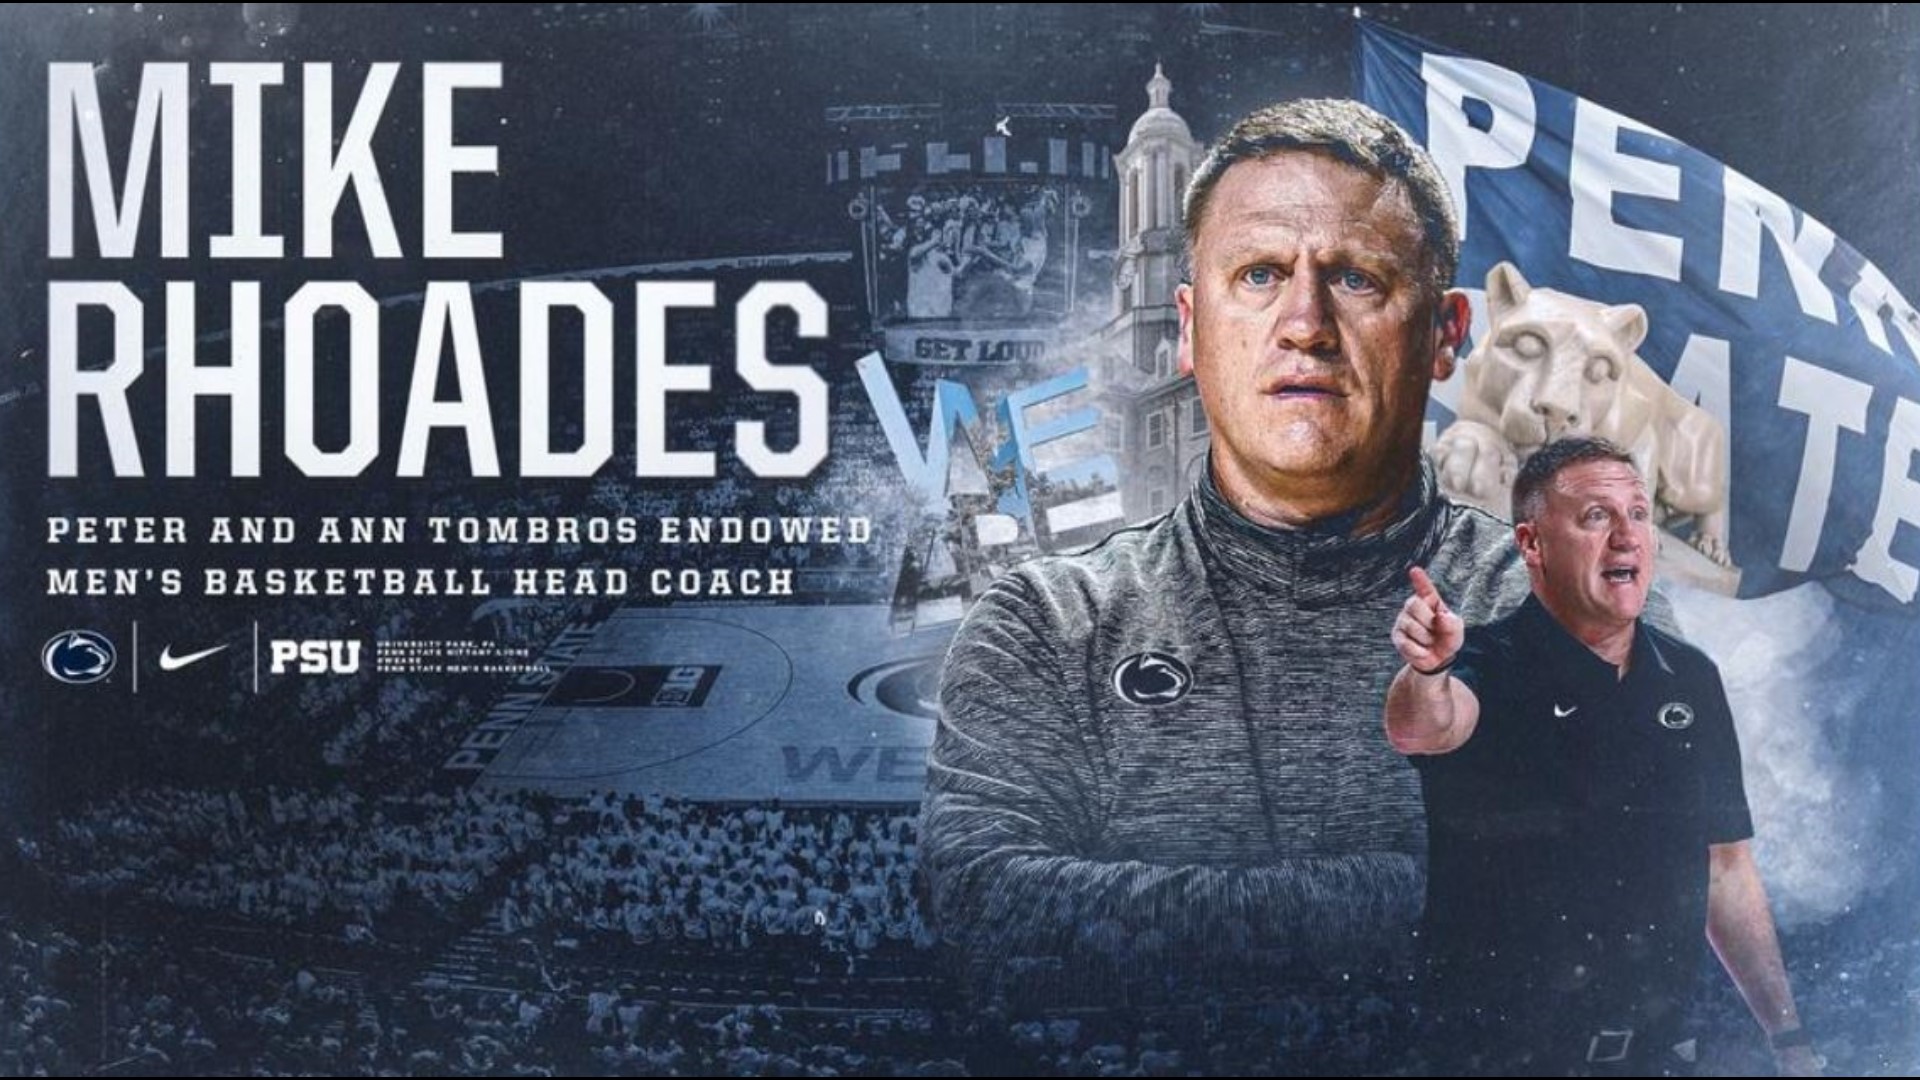 A new era has begun for the Penn State men's basketball program and it's been a wild 24 hours for Mike Rhoades.